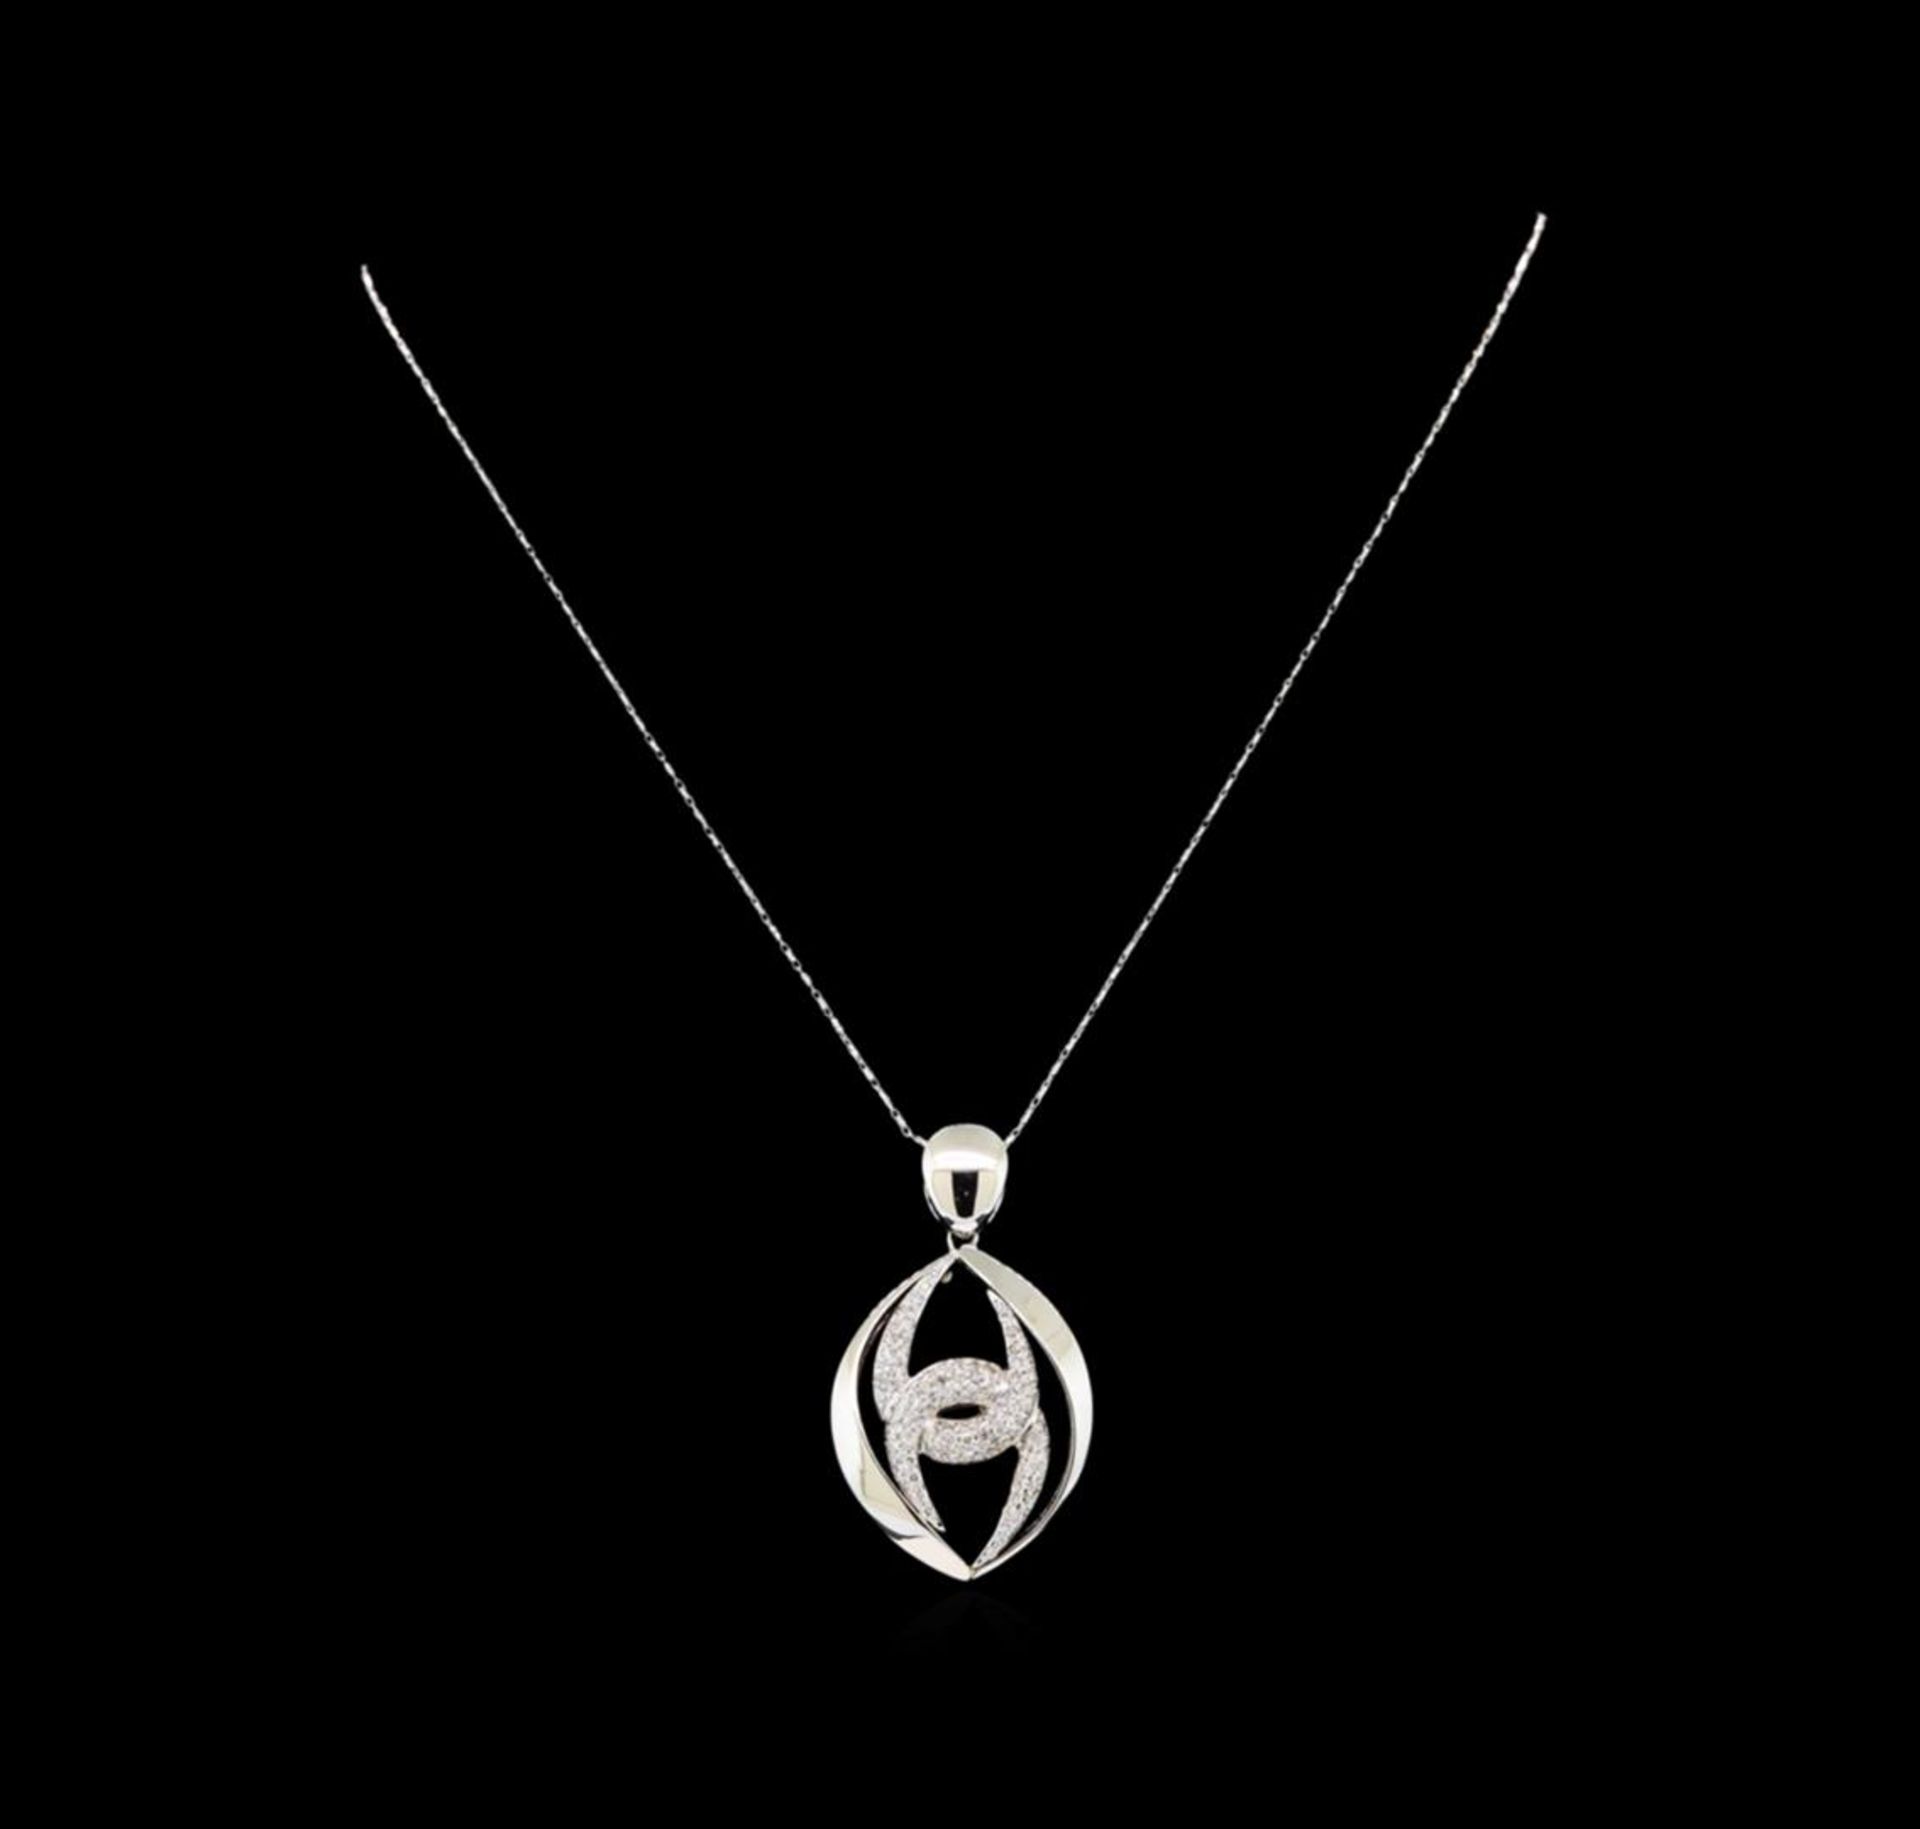 14KT White Gold 1.40 ctw Diamond Pendant With Chain - Image 2 of 3